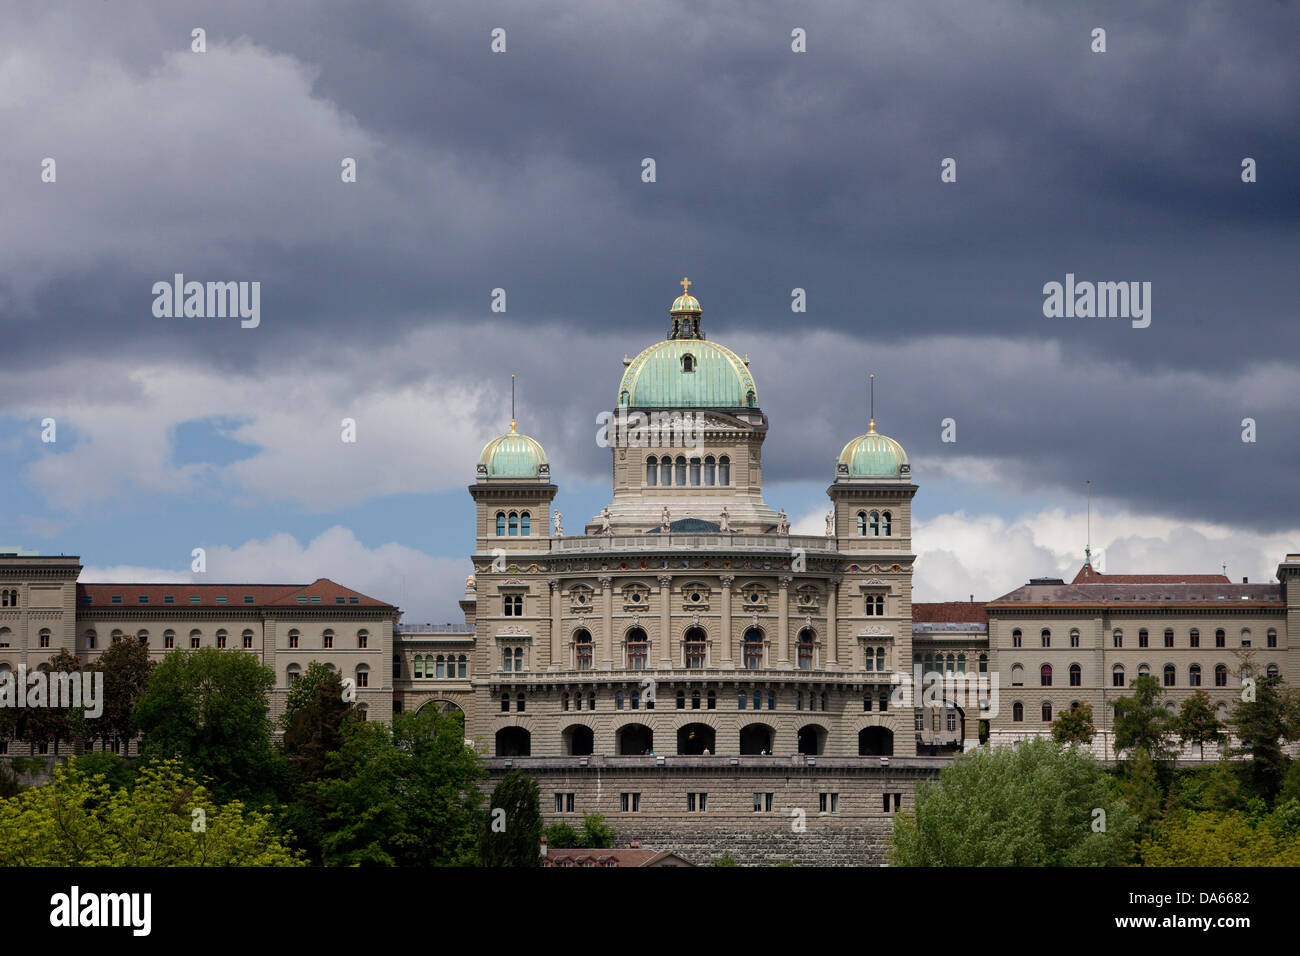 Federal Parliament, Bern, building, construction, weather, clouds, cloud, canton, Bern, Switzerland, Europe, parliament, dome, Stock Photo